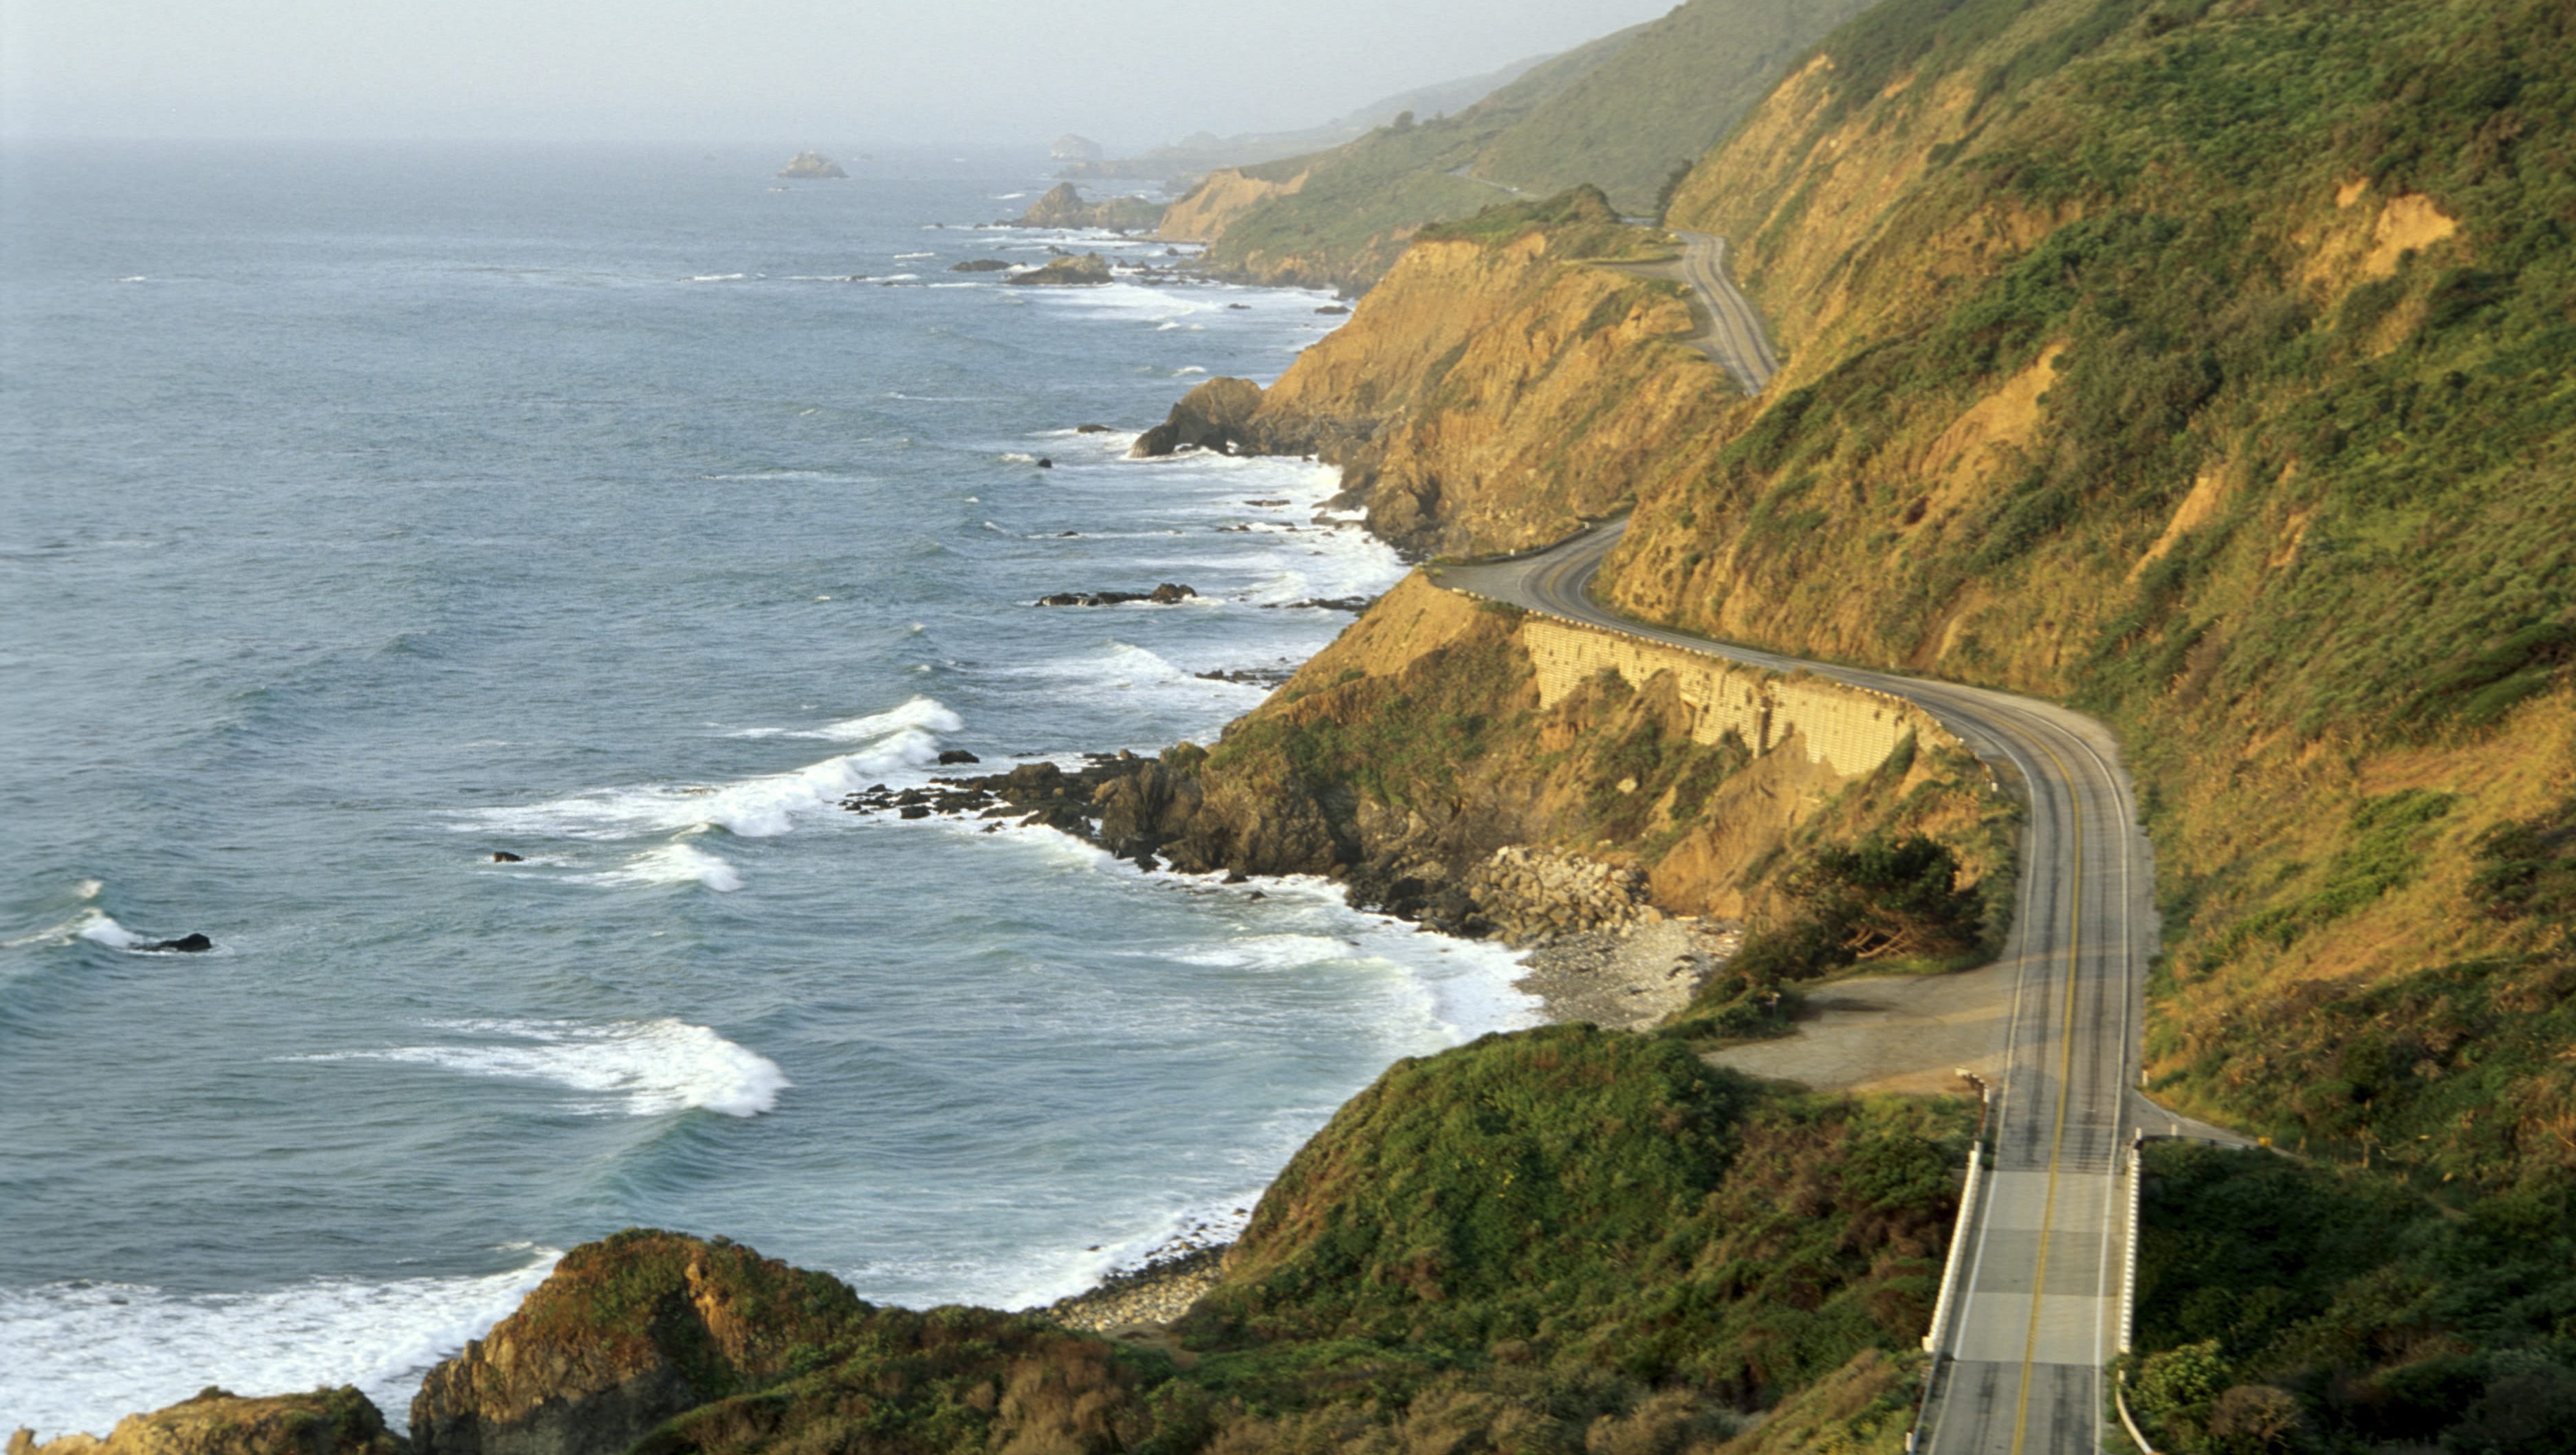 Visit these top 5 places California